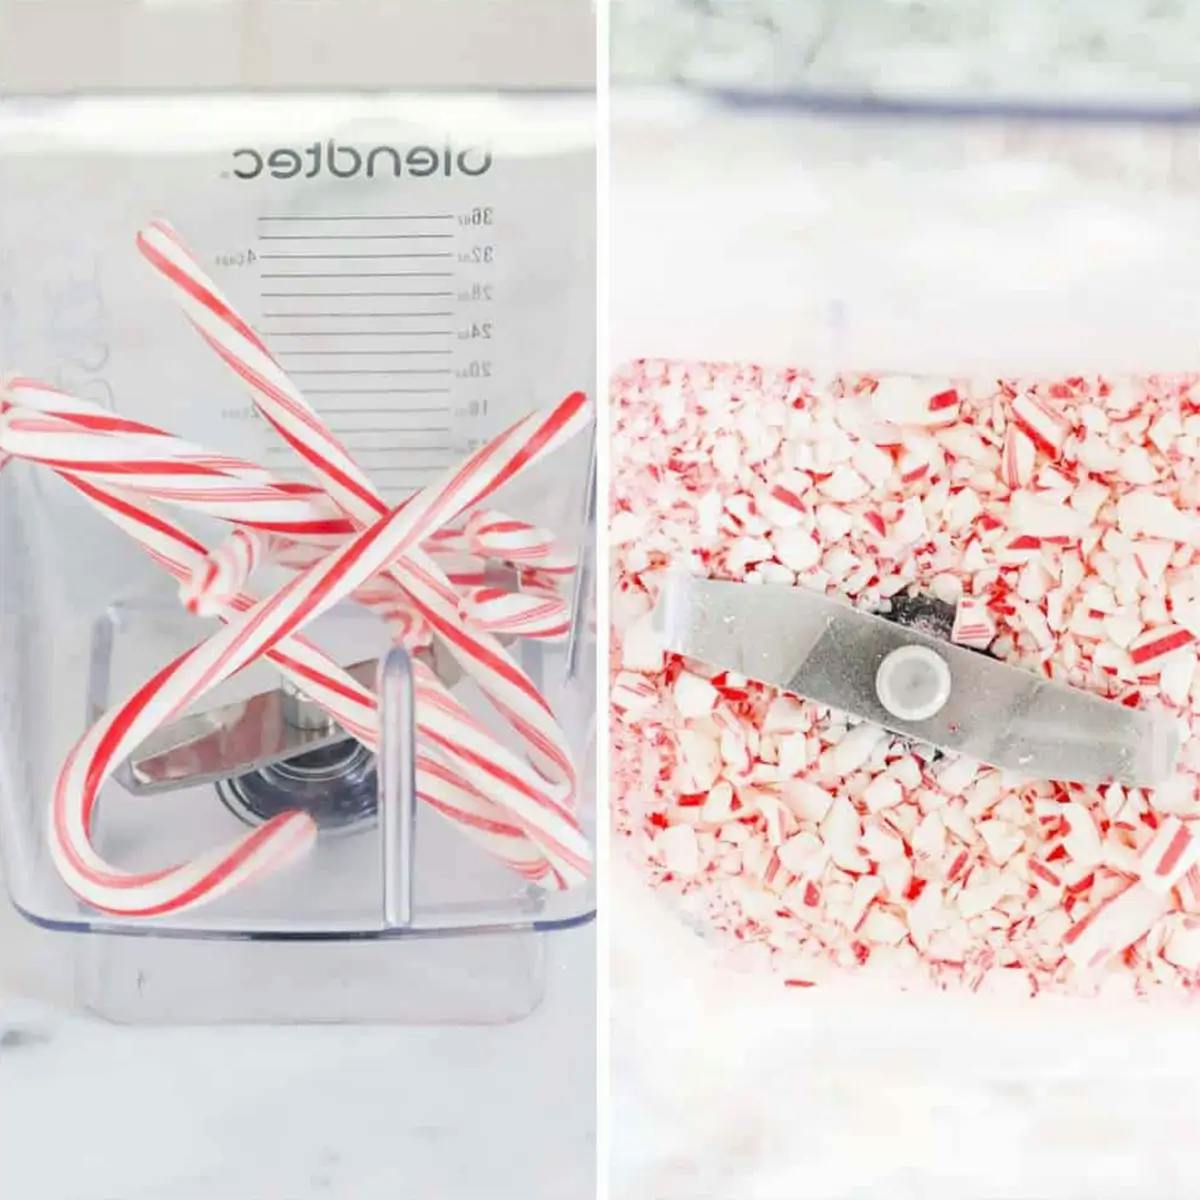 Candy canes being crushed in a food processor for a peppermint bark recipe.